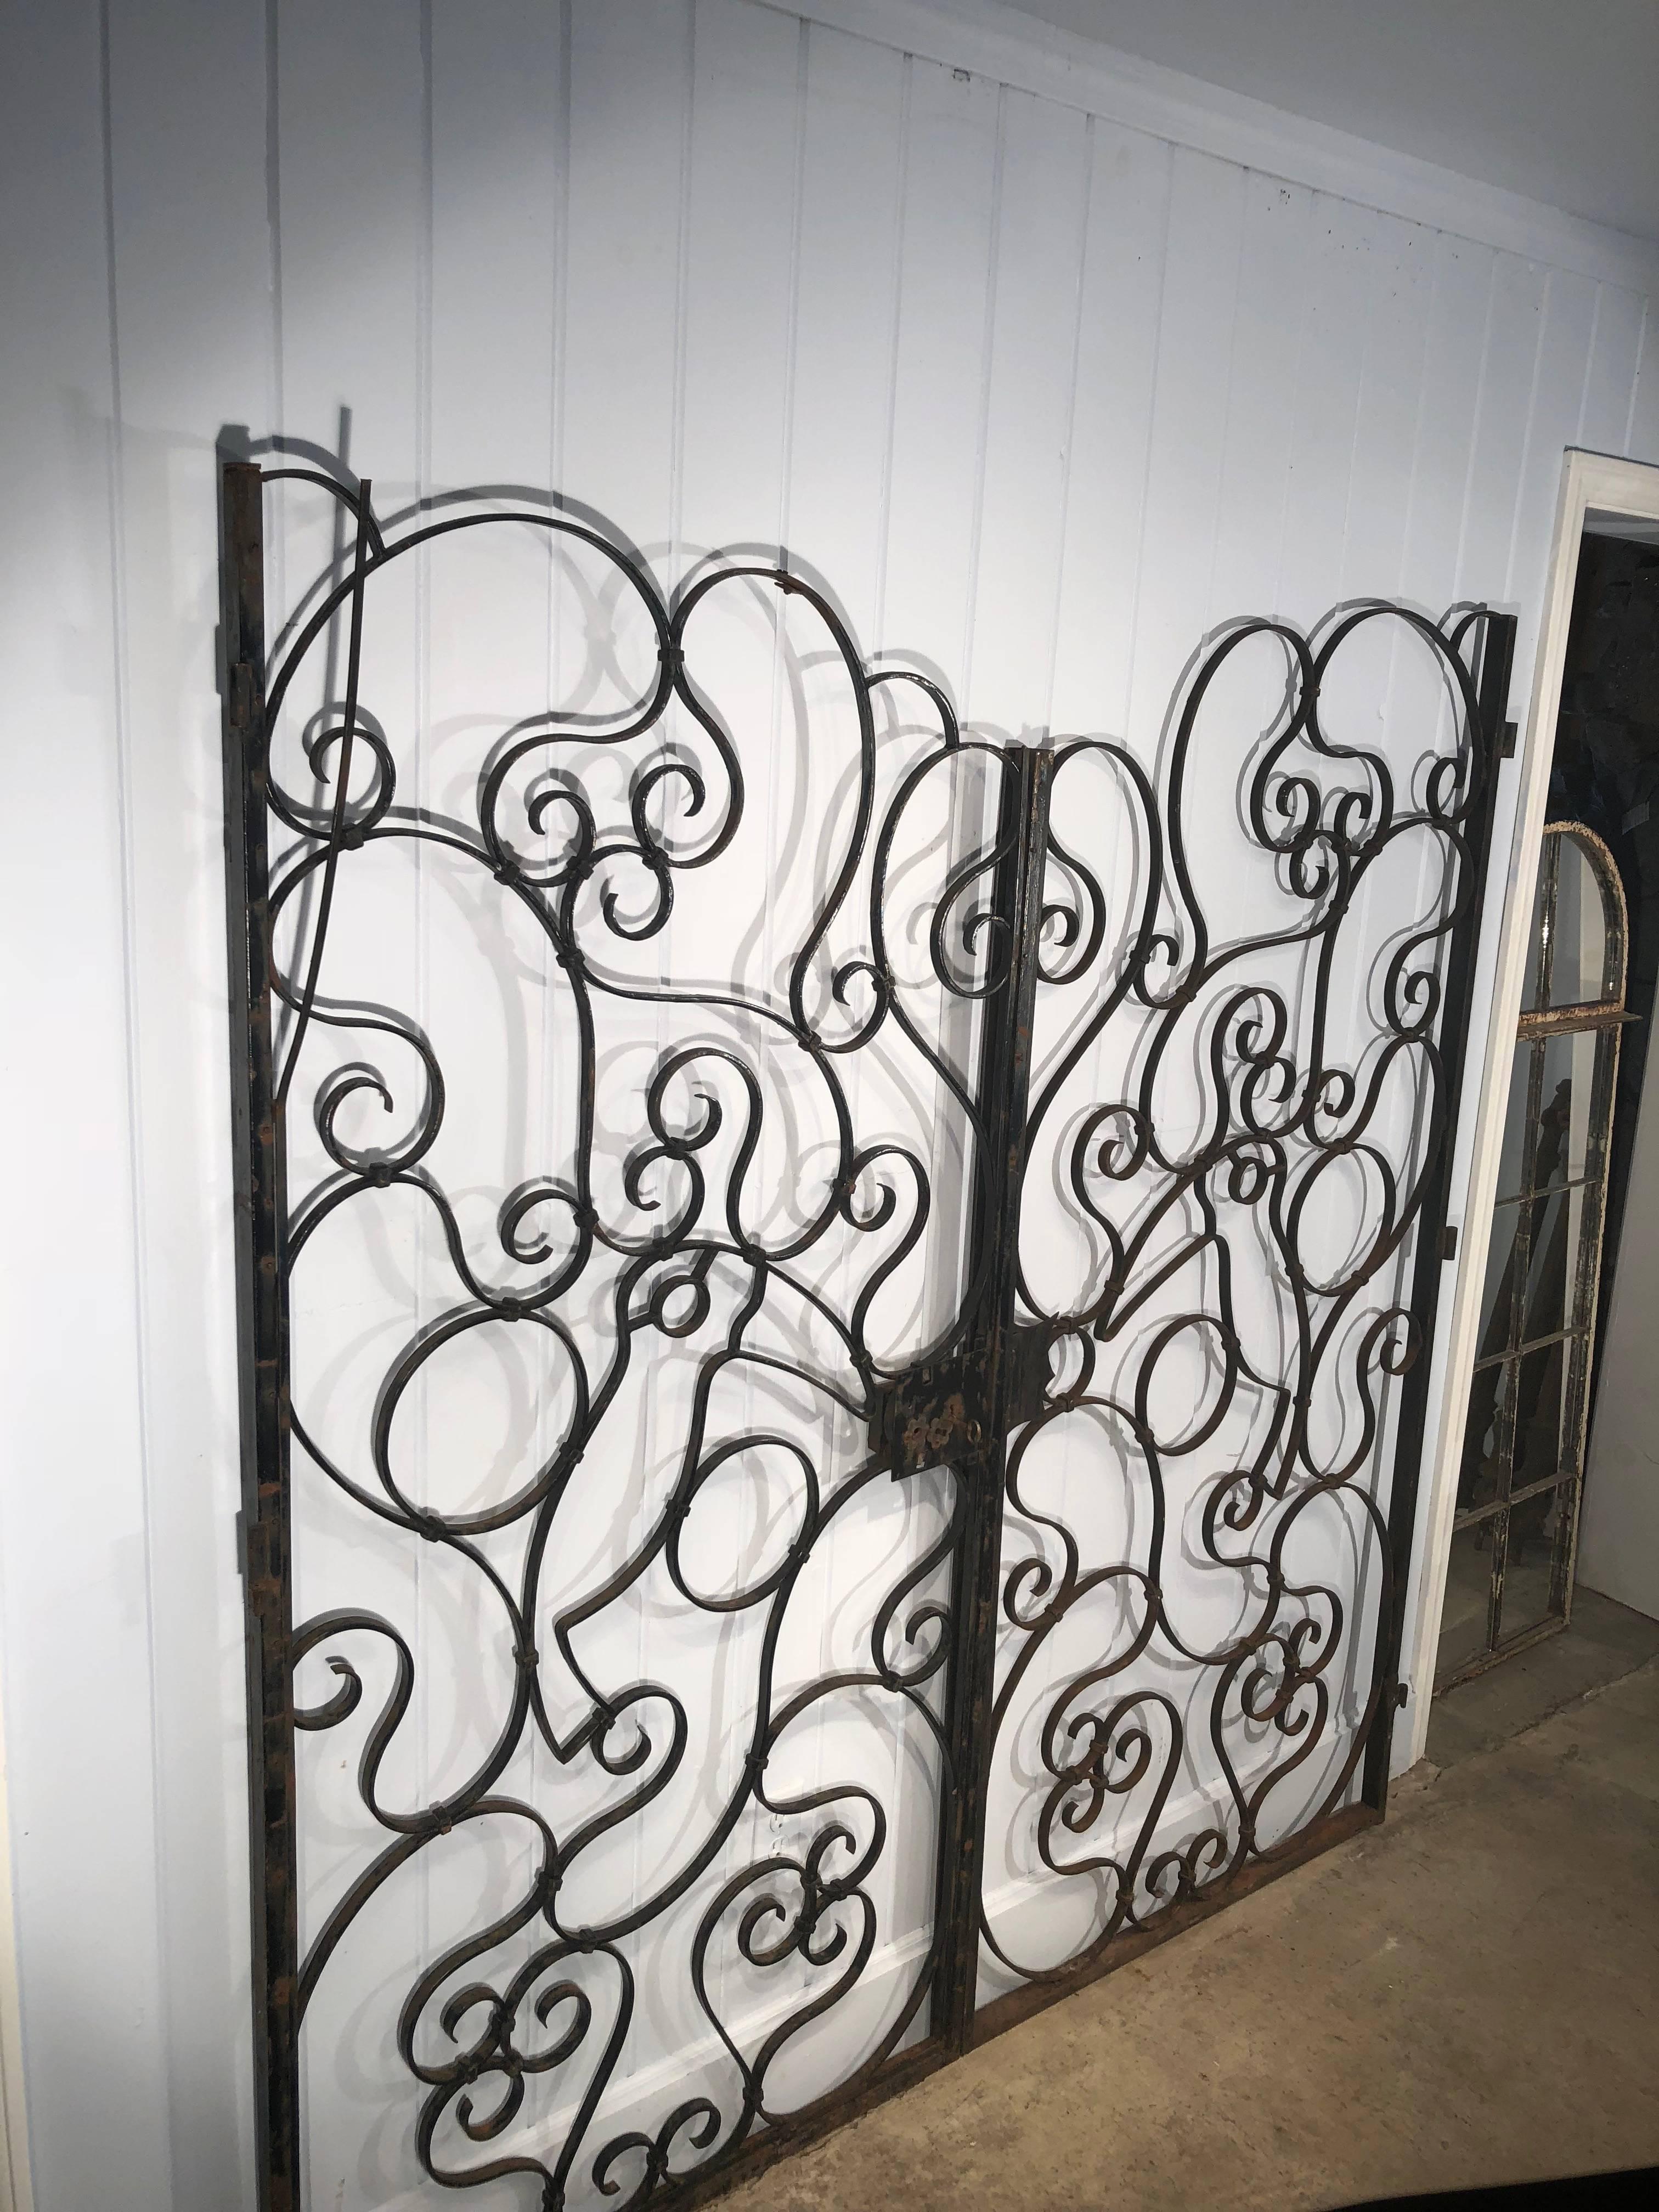 Now these gates are real show-stoppers! French-crafted of wrought iron with welded joints, they feature a pair of toucans, one on each side. They also have an 19th century lock with its original key that actually works! We will reattach the